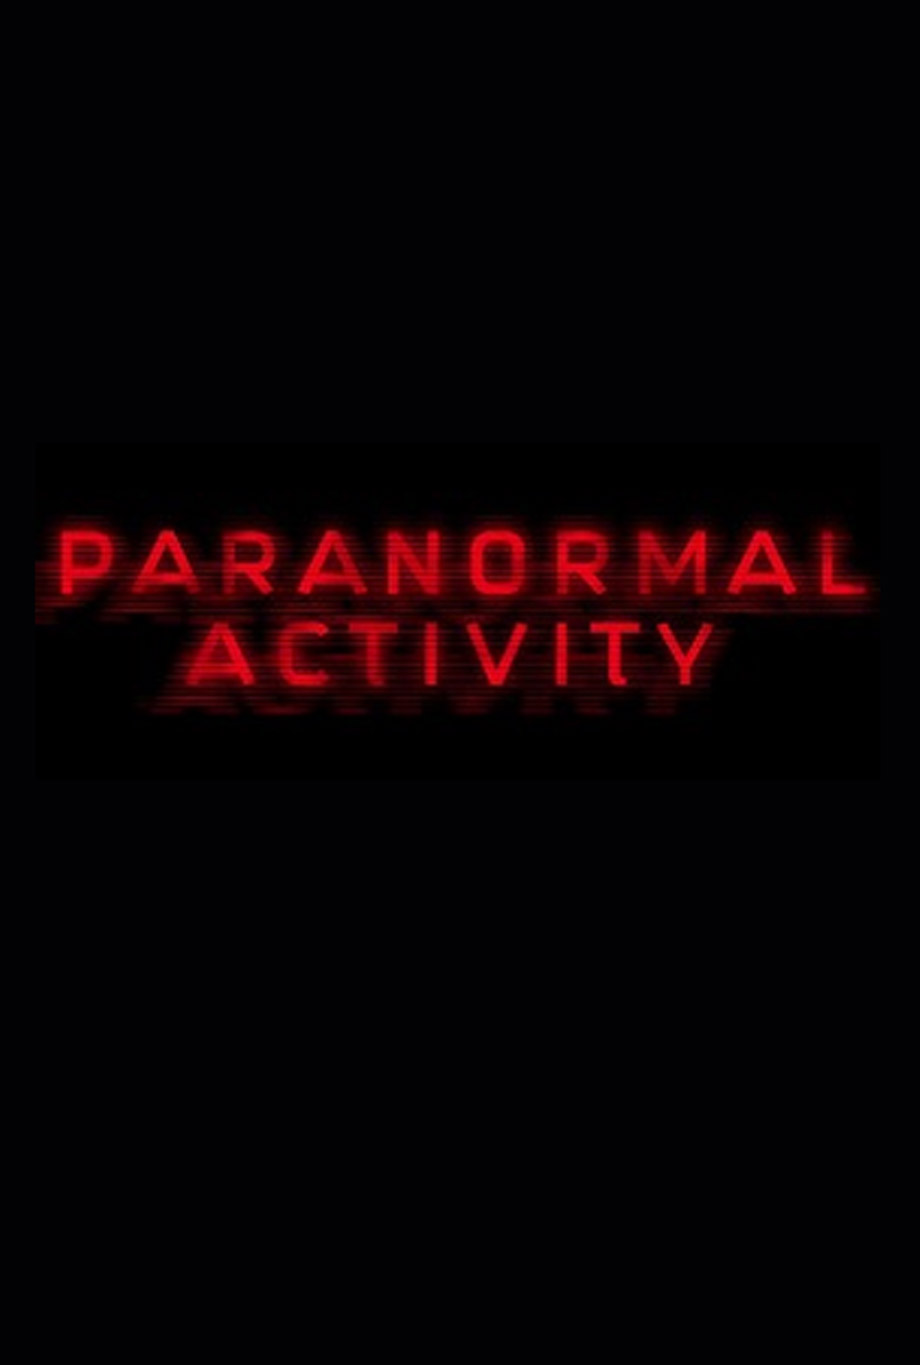 Paranormal Activity Next Of Kin Movie Wallpapers